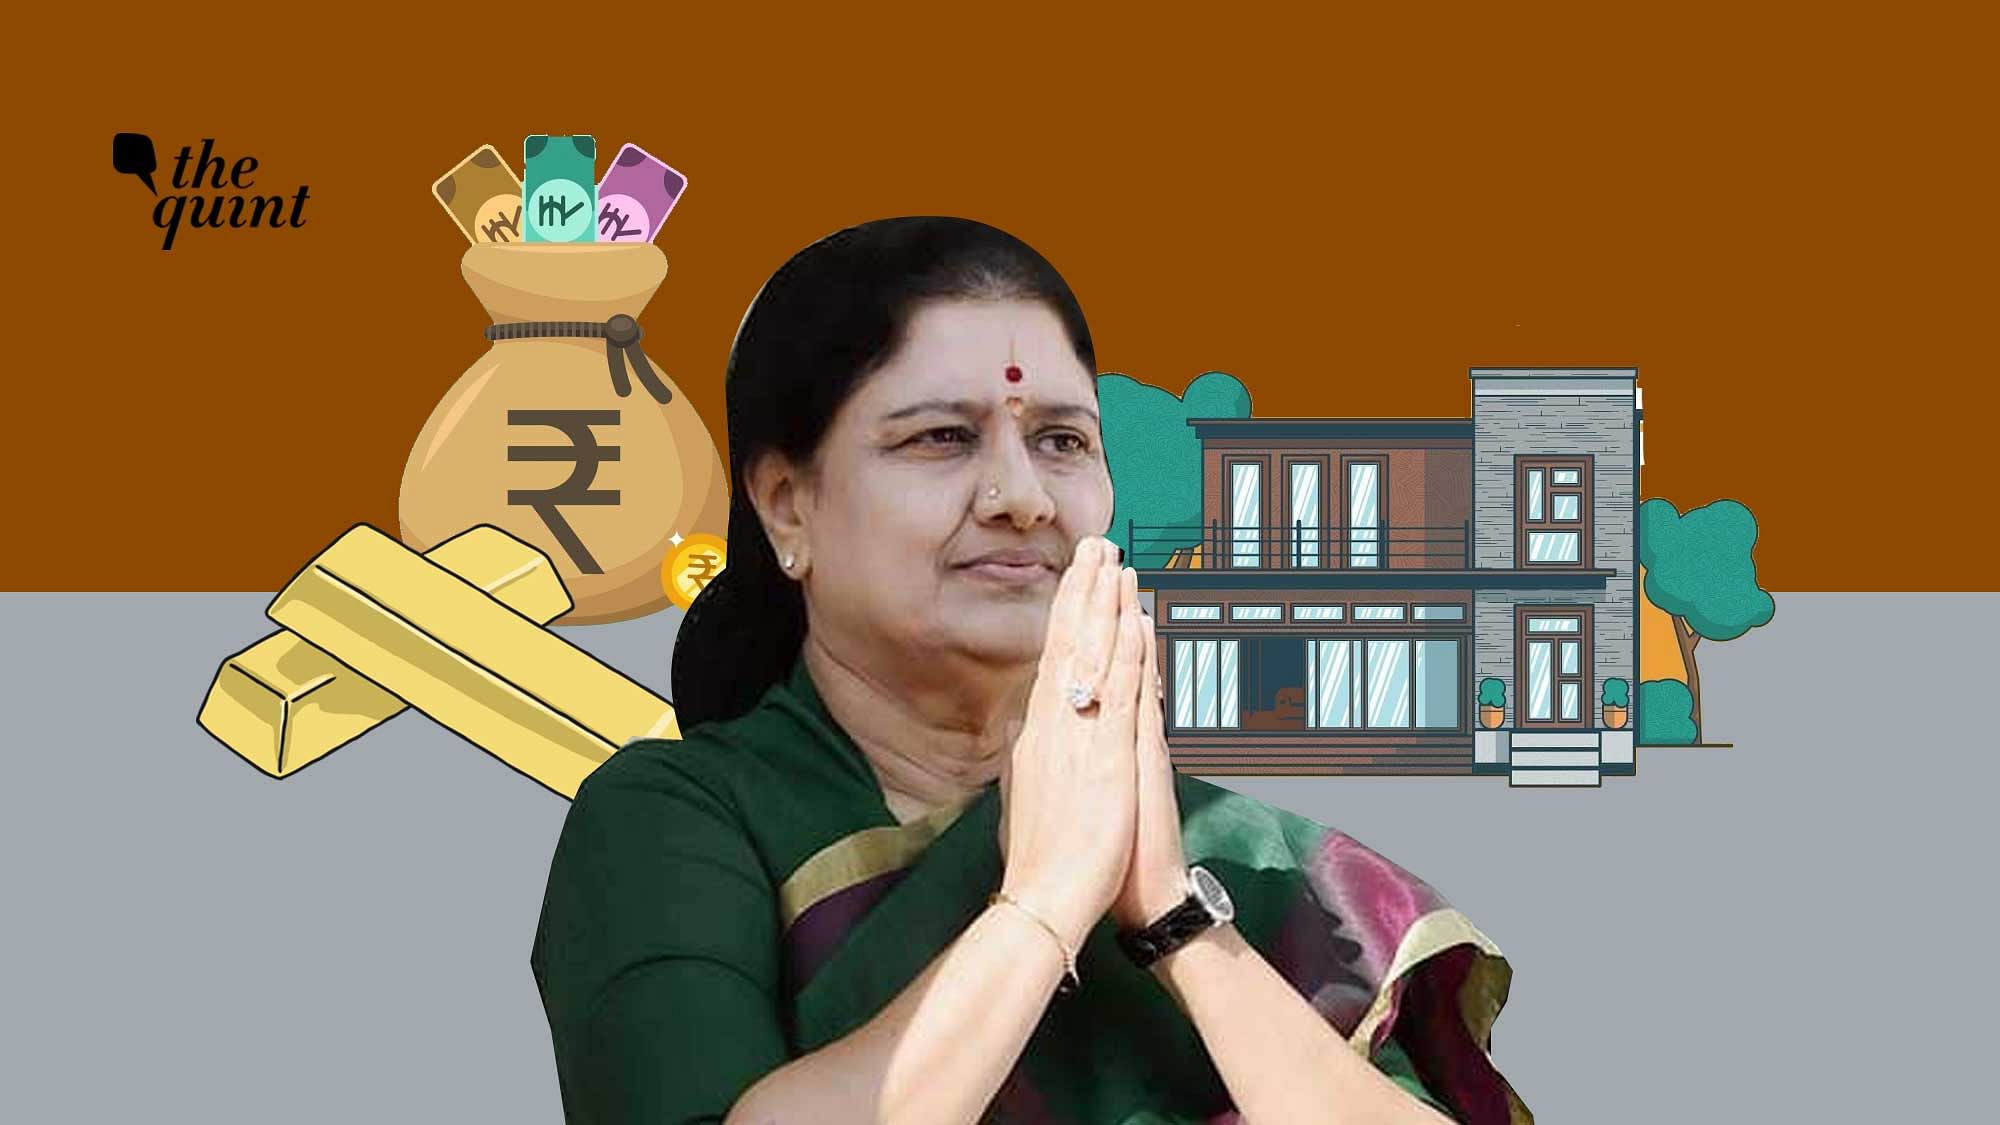 On 3 March, Jayalalithaa’s former aide Sasikala announced her decision to quit politics, and public life.